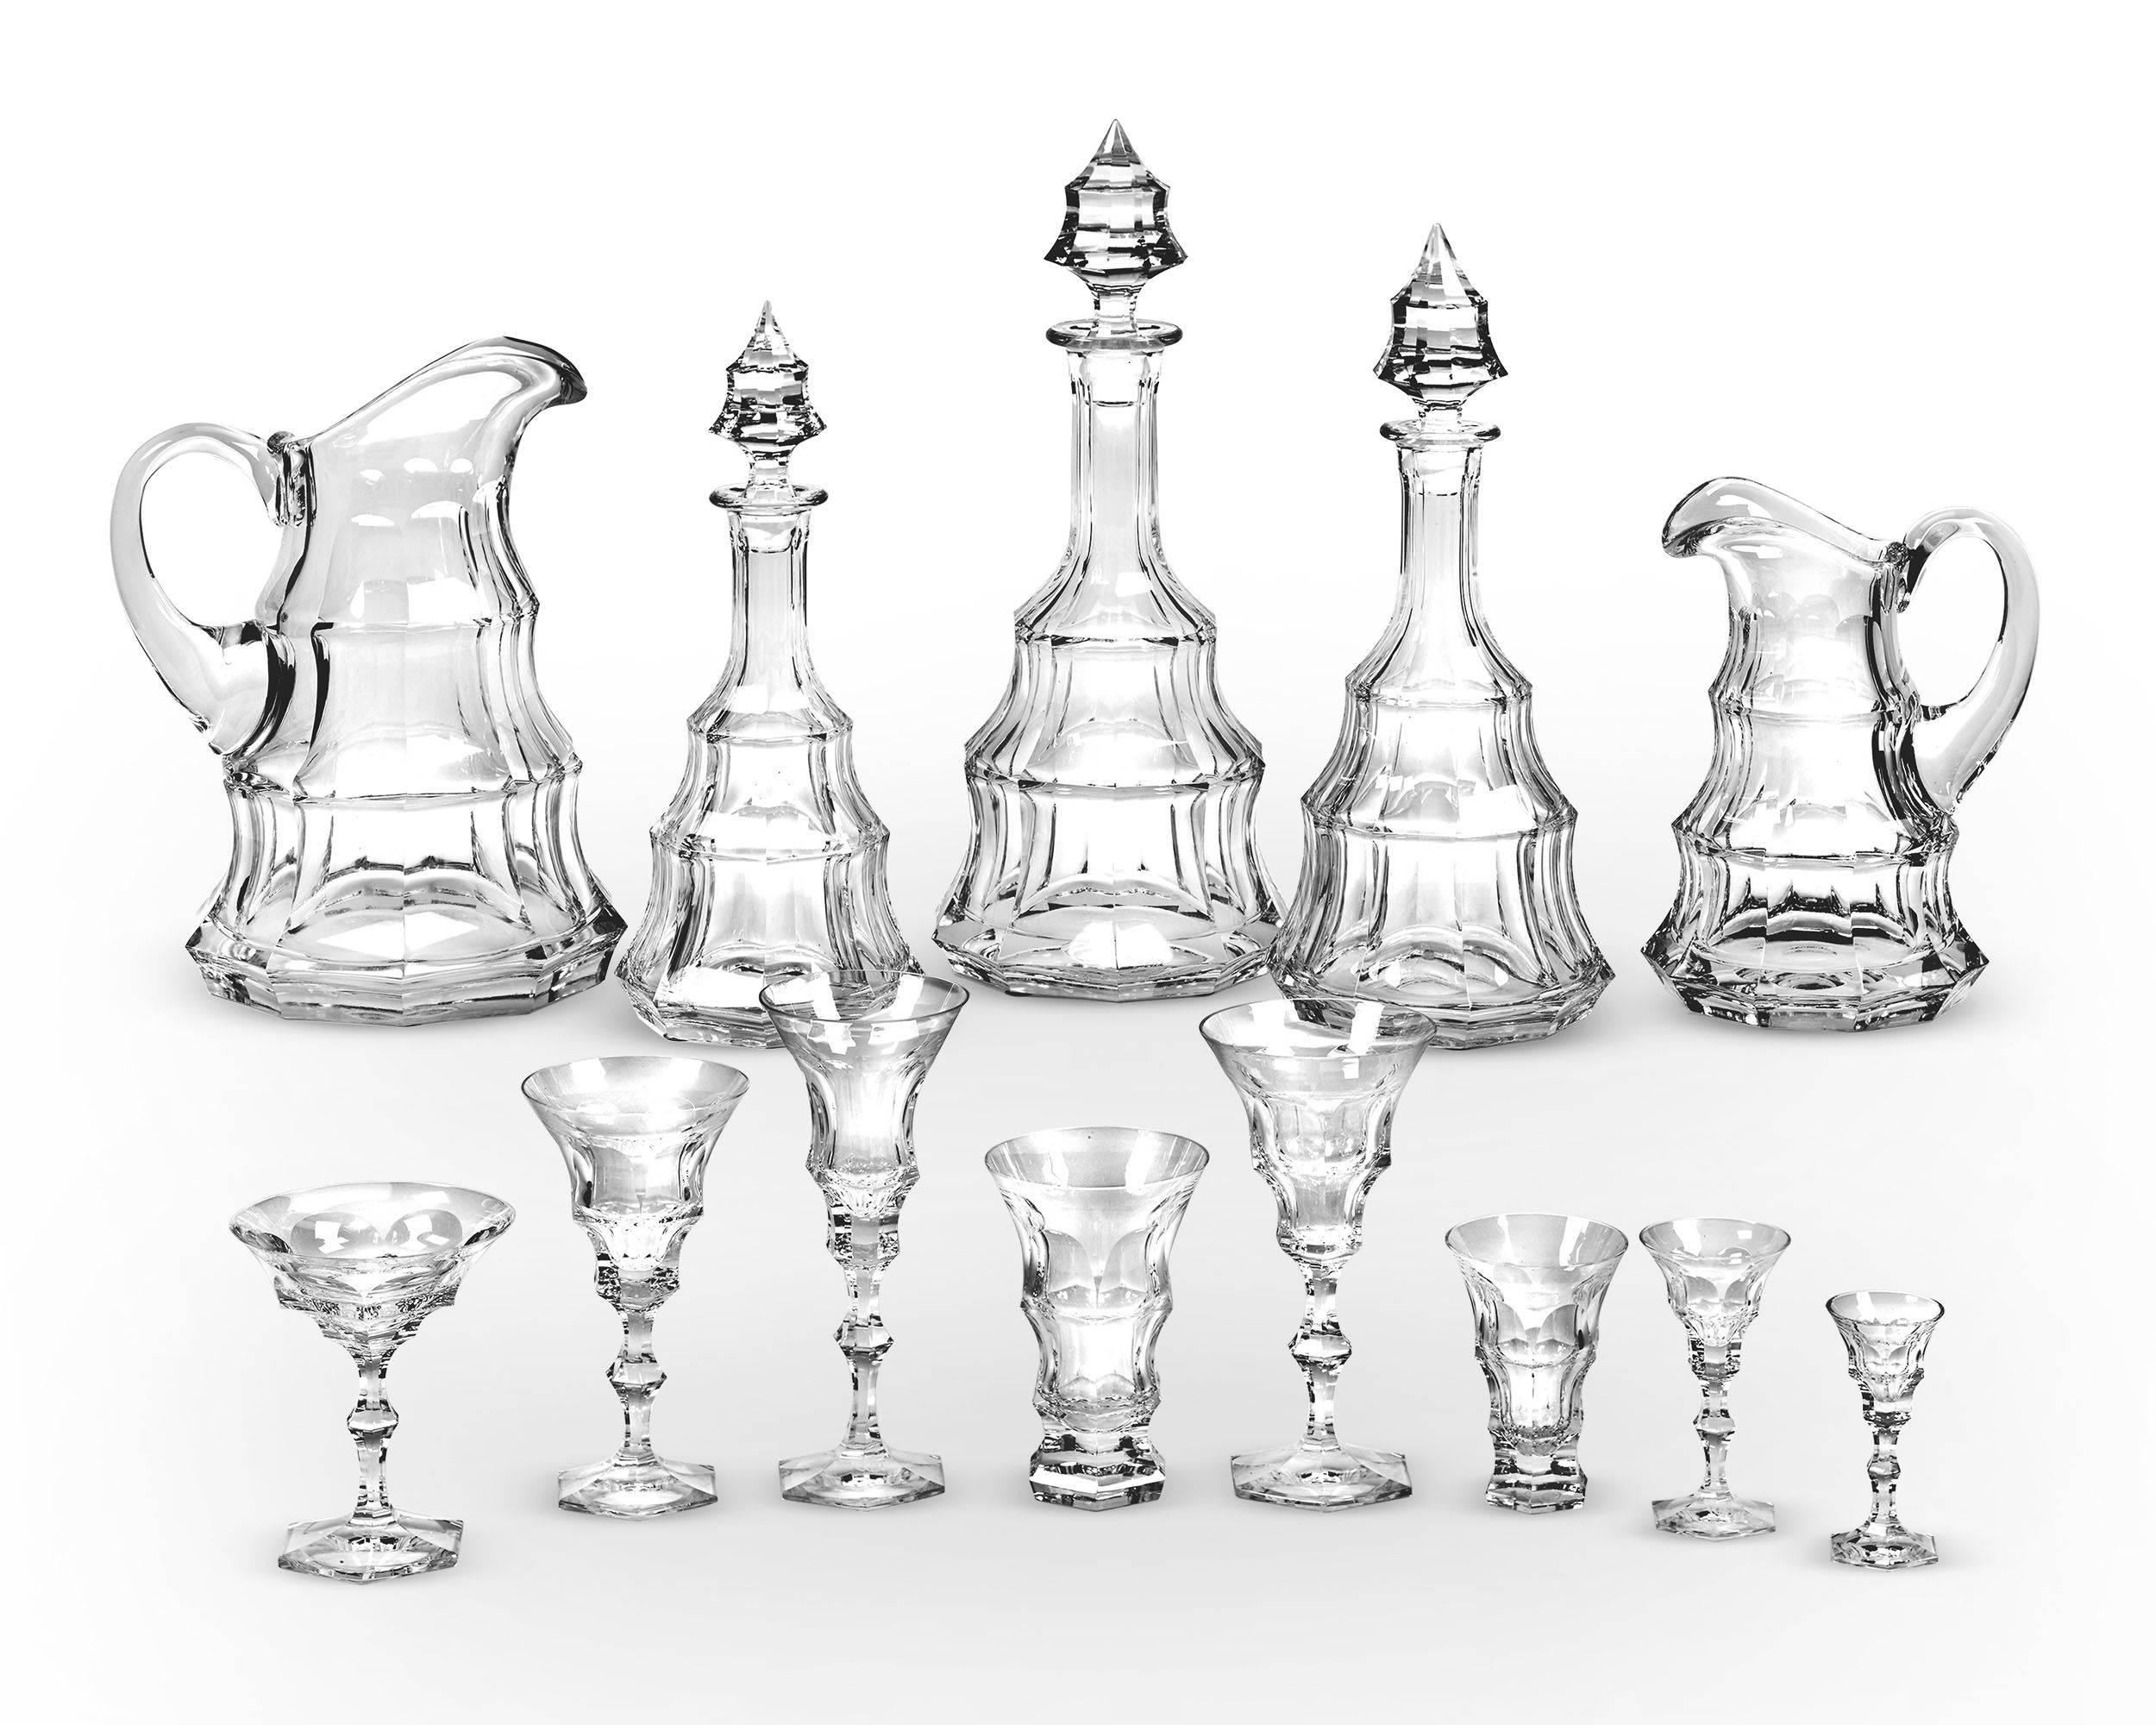 This monumental and luxurious 101-piece Bohemian crystal beverage service was crafted by the inimitable Ludwig Moser & Söhne glass company in the desirable Diplomat pattern. The service is a specimen in time-honored glass craftsmanship, with each